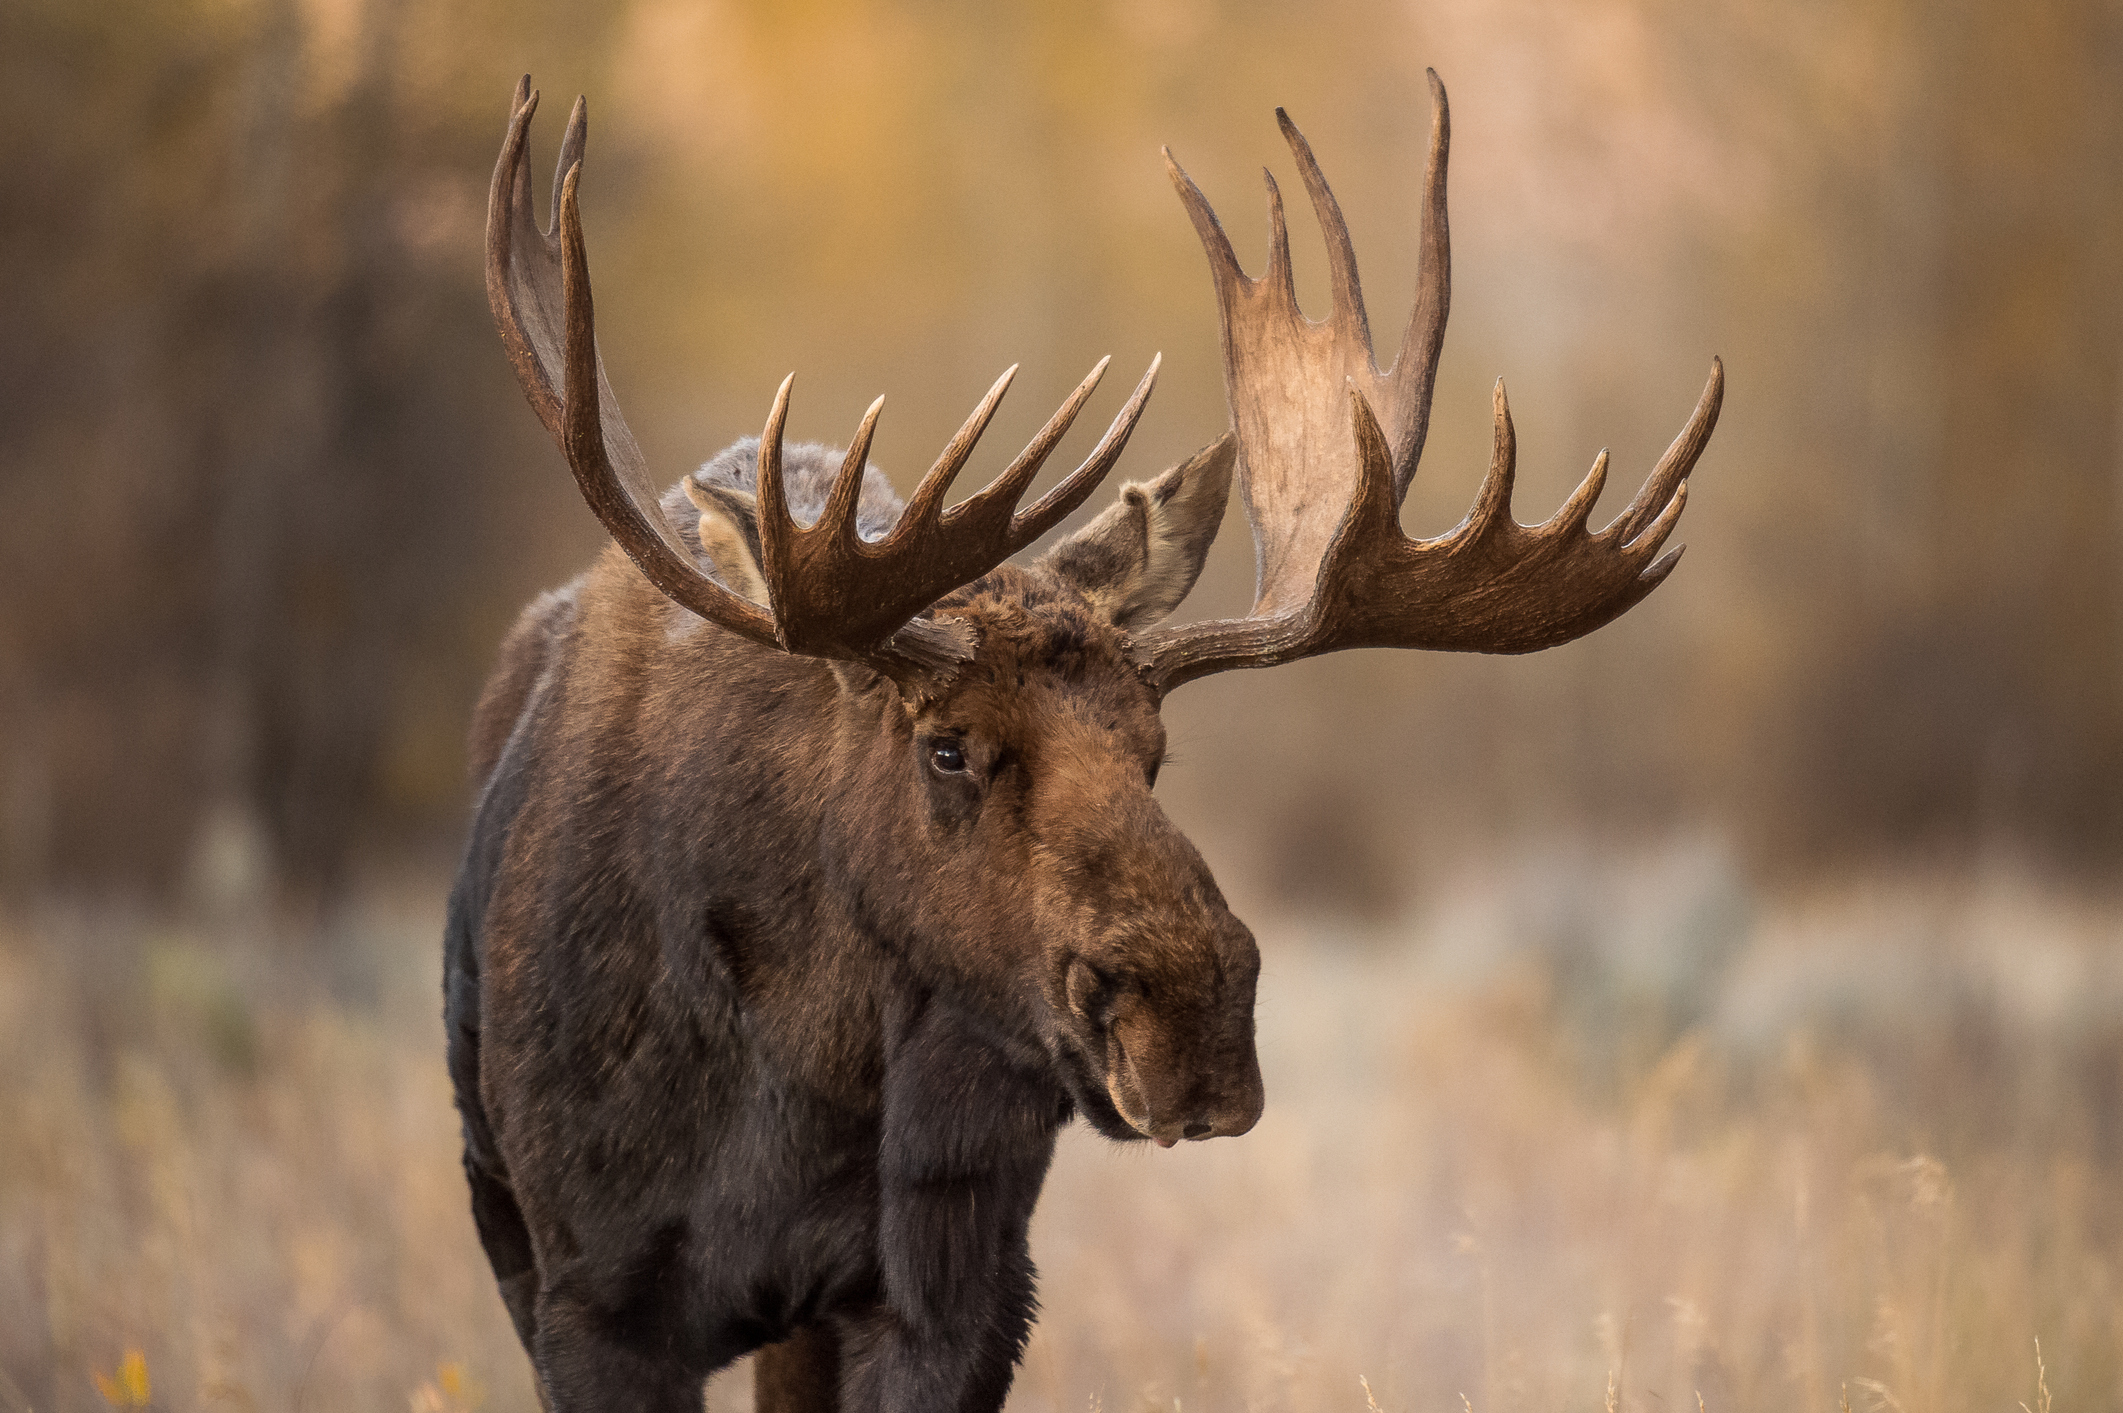 A portrait of an older bull moose in the greater Yellowstone ecosystem.